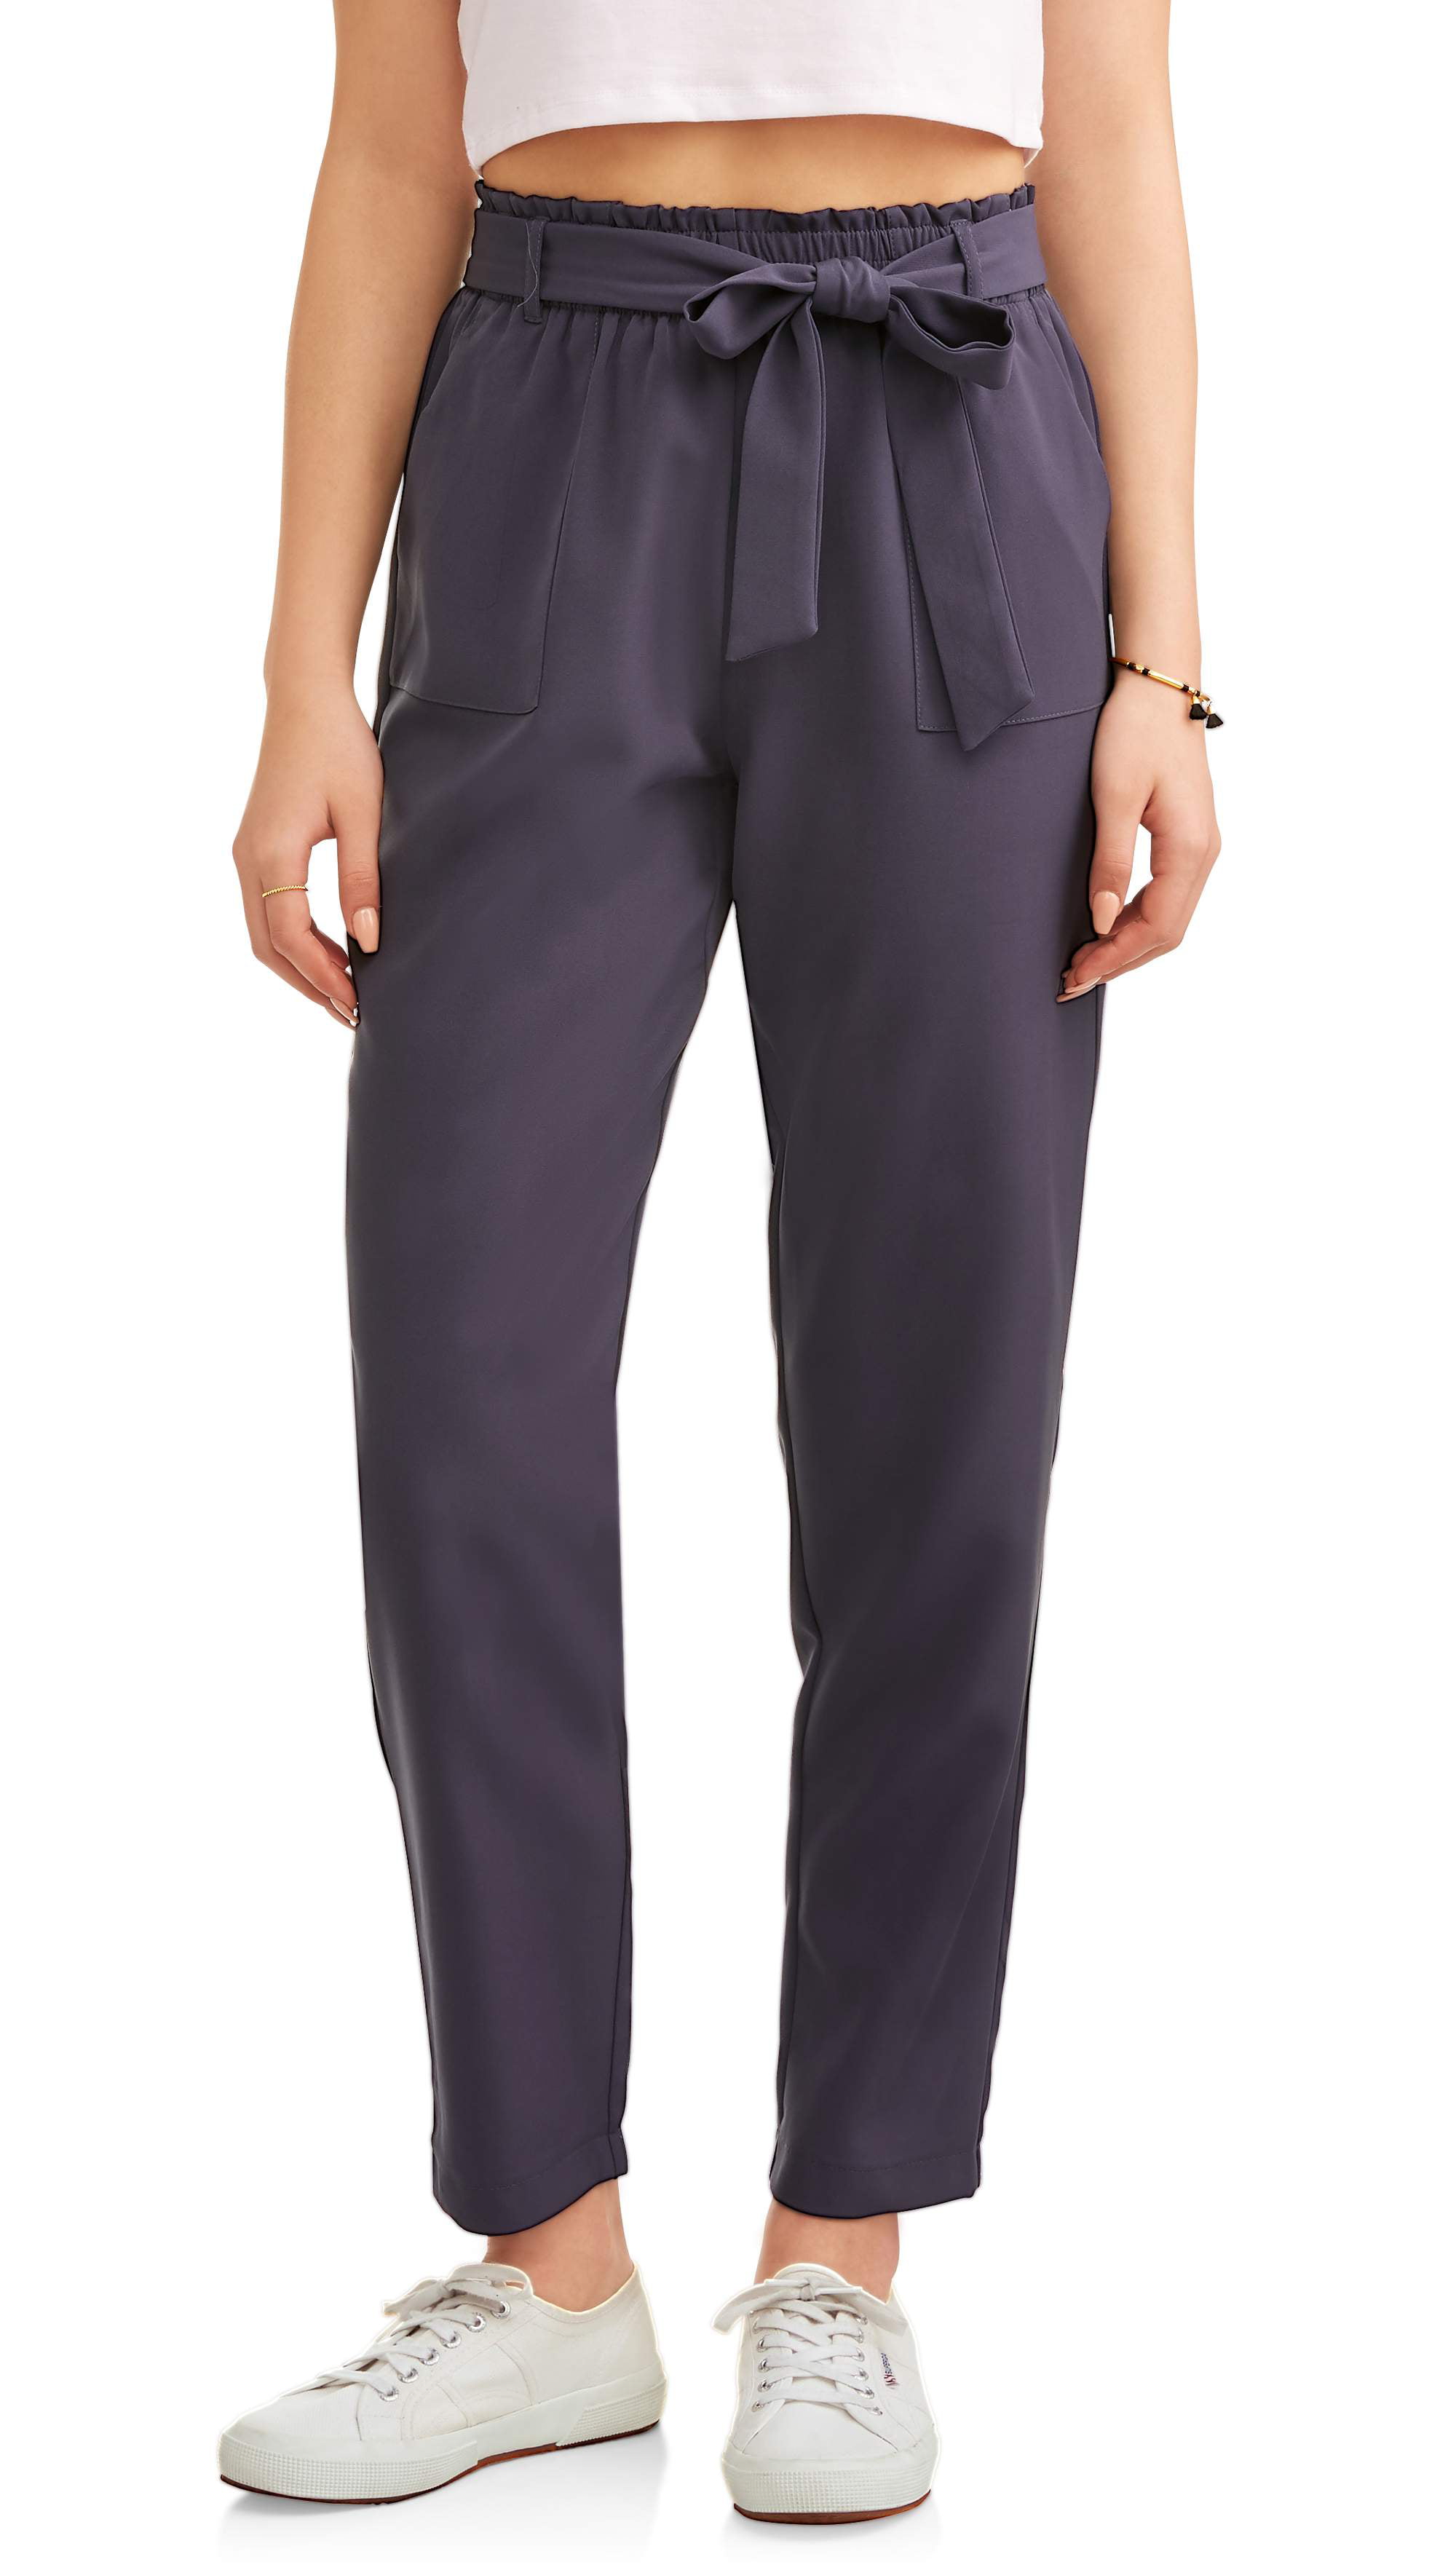 Shinestar Juniors' High-Waist Pull-On Tapered Ankle Pants w/ Tie ...